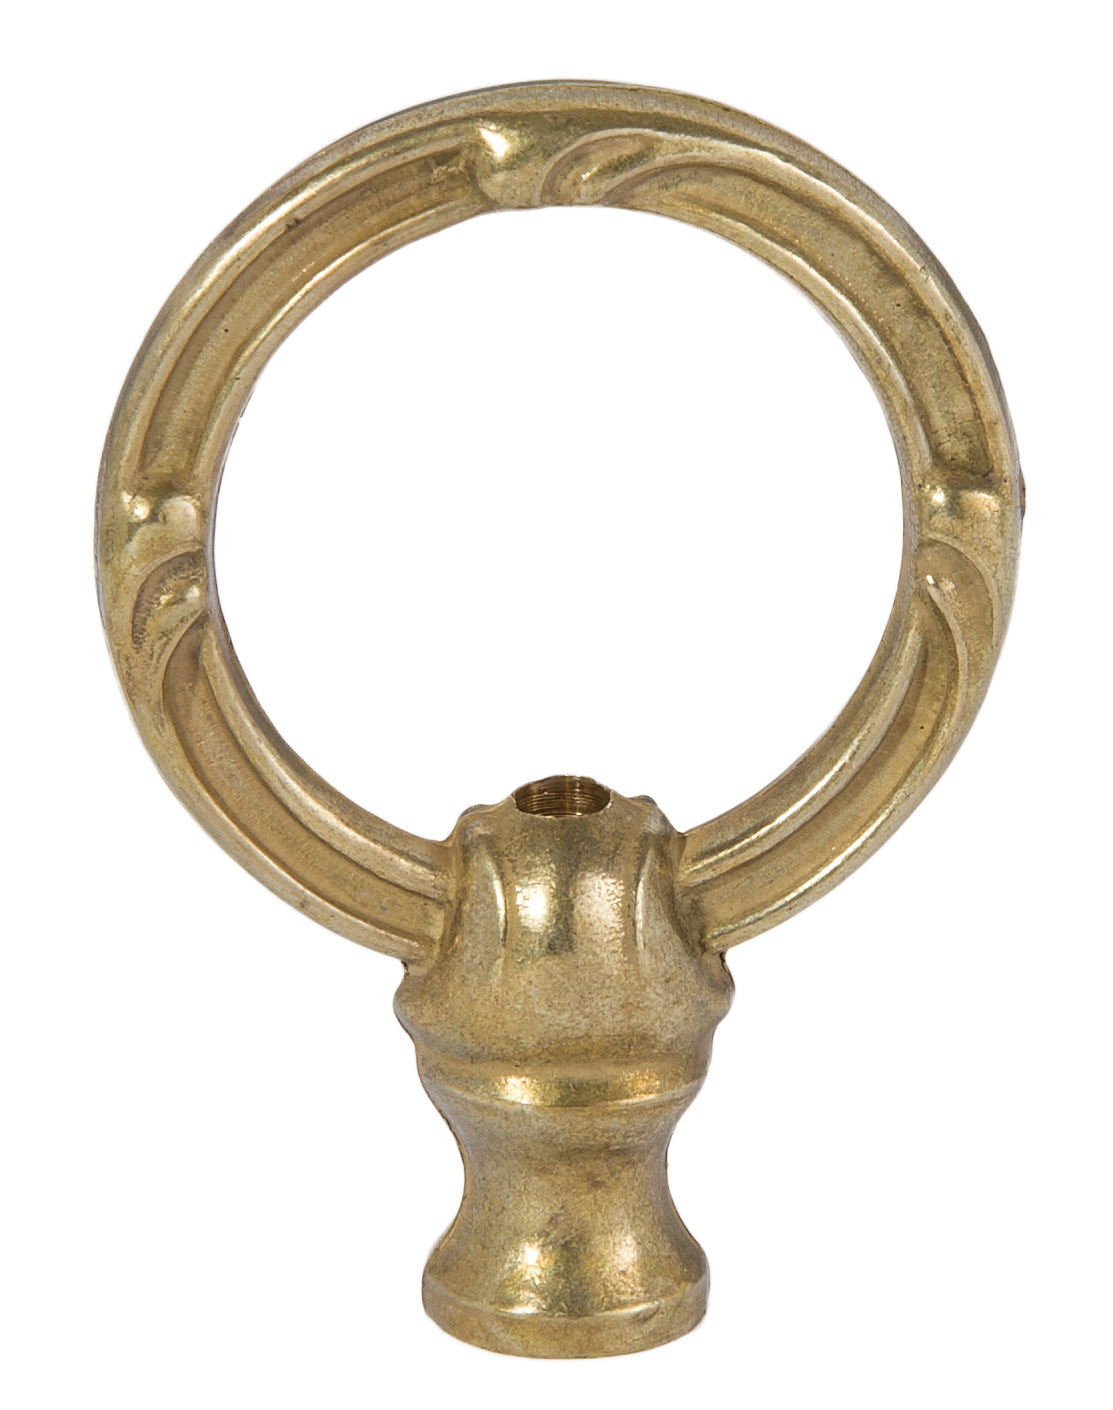 3-5/8" Tall x 2-5/8" wide Cast Brass Loop with wire way, tap 1/8F (3/8" diameter), unfinished